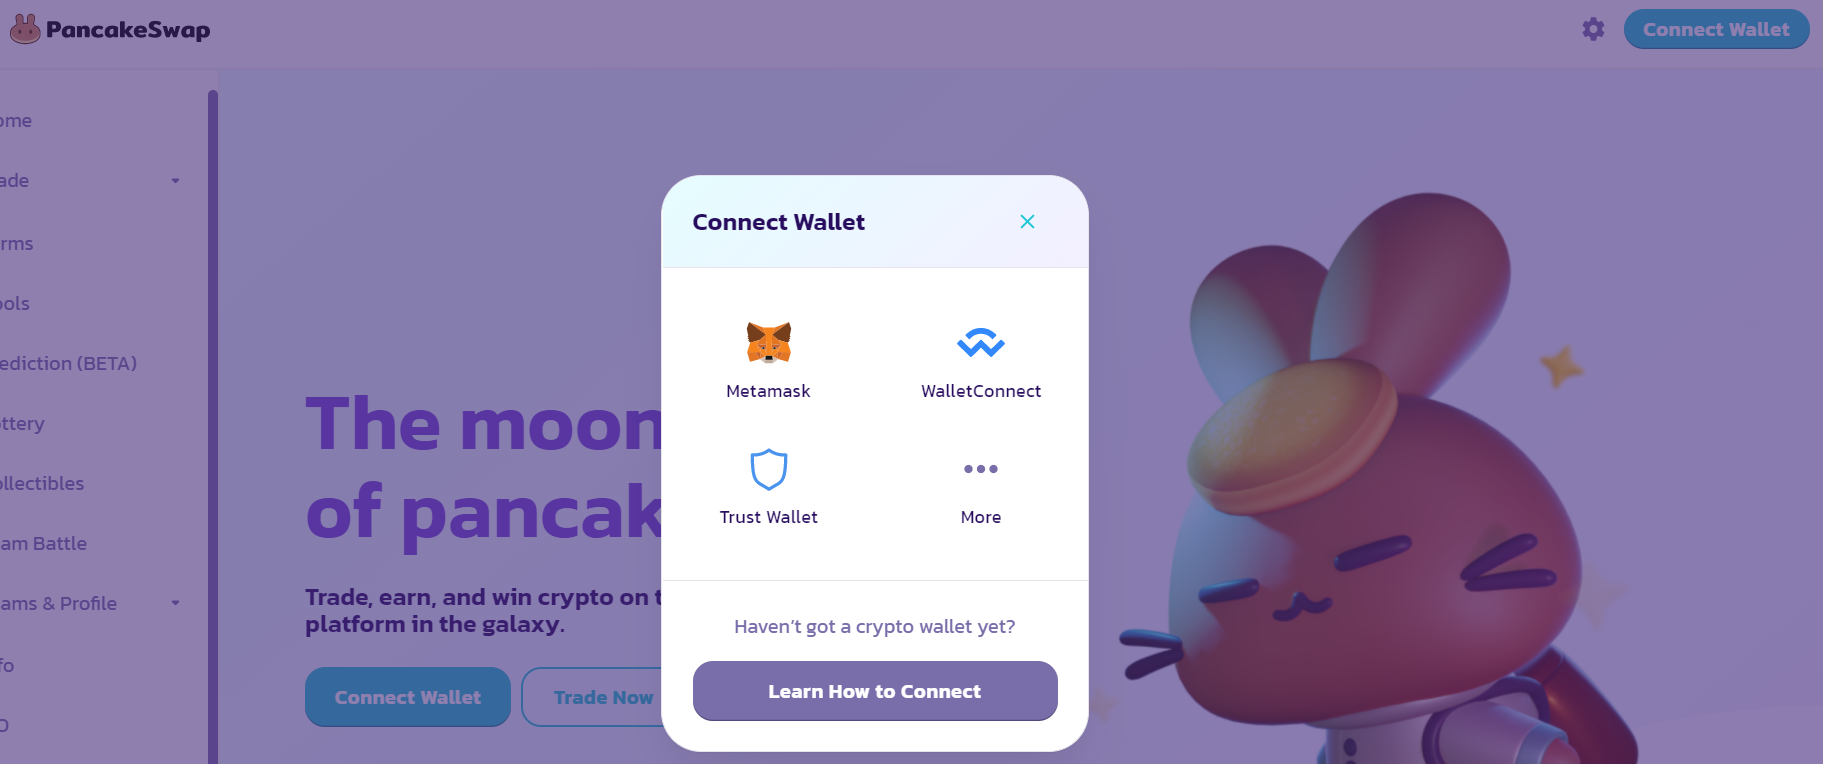 How to Buy SafeMoon in PancakeSwap? - A Detailed Guide